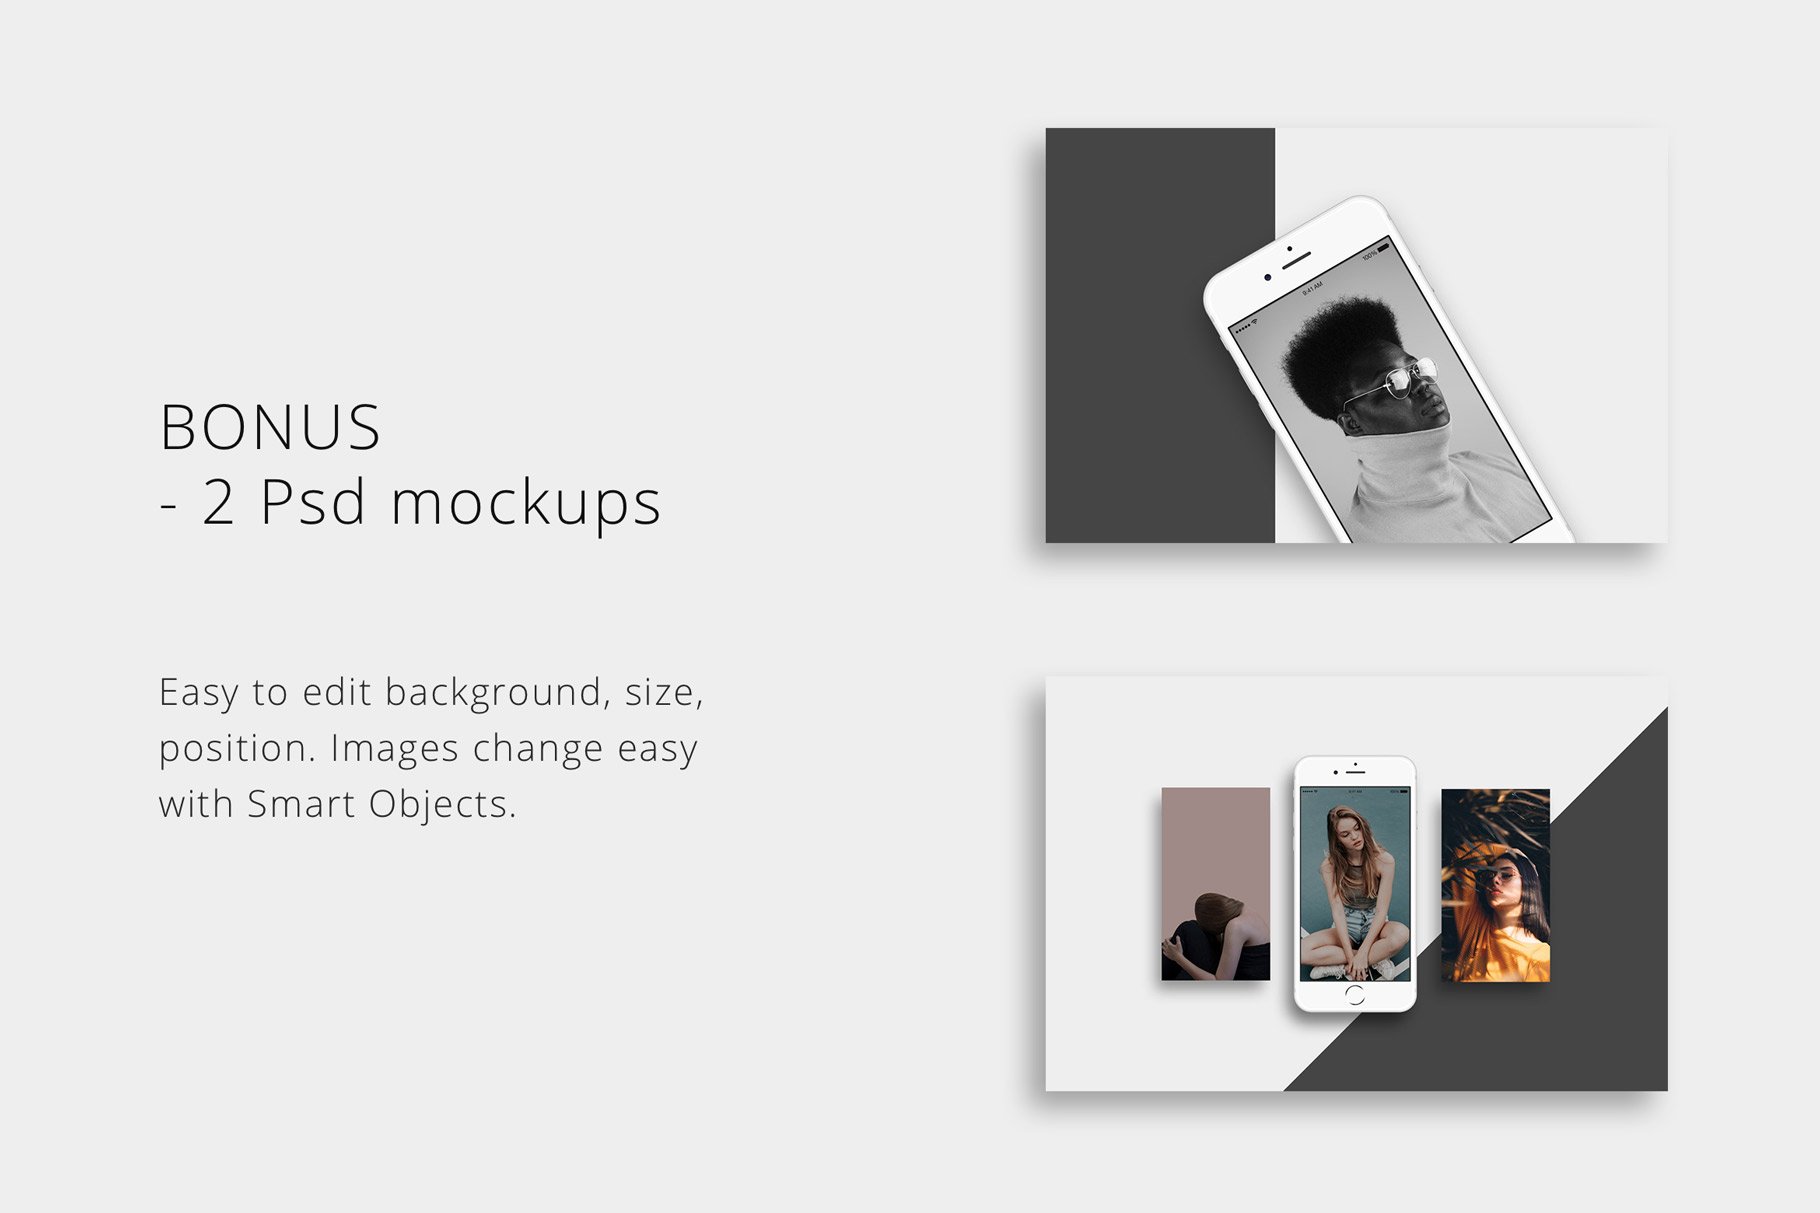 Also you will have a bonus such as 2 PSD mockups.